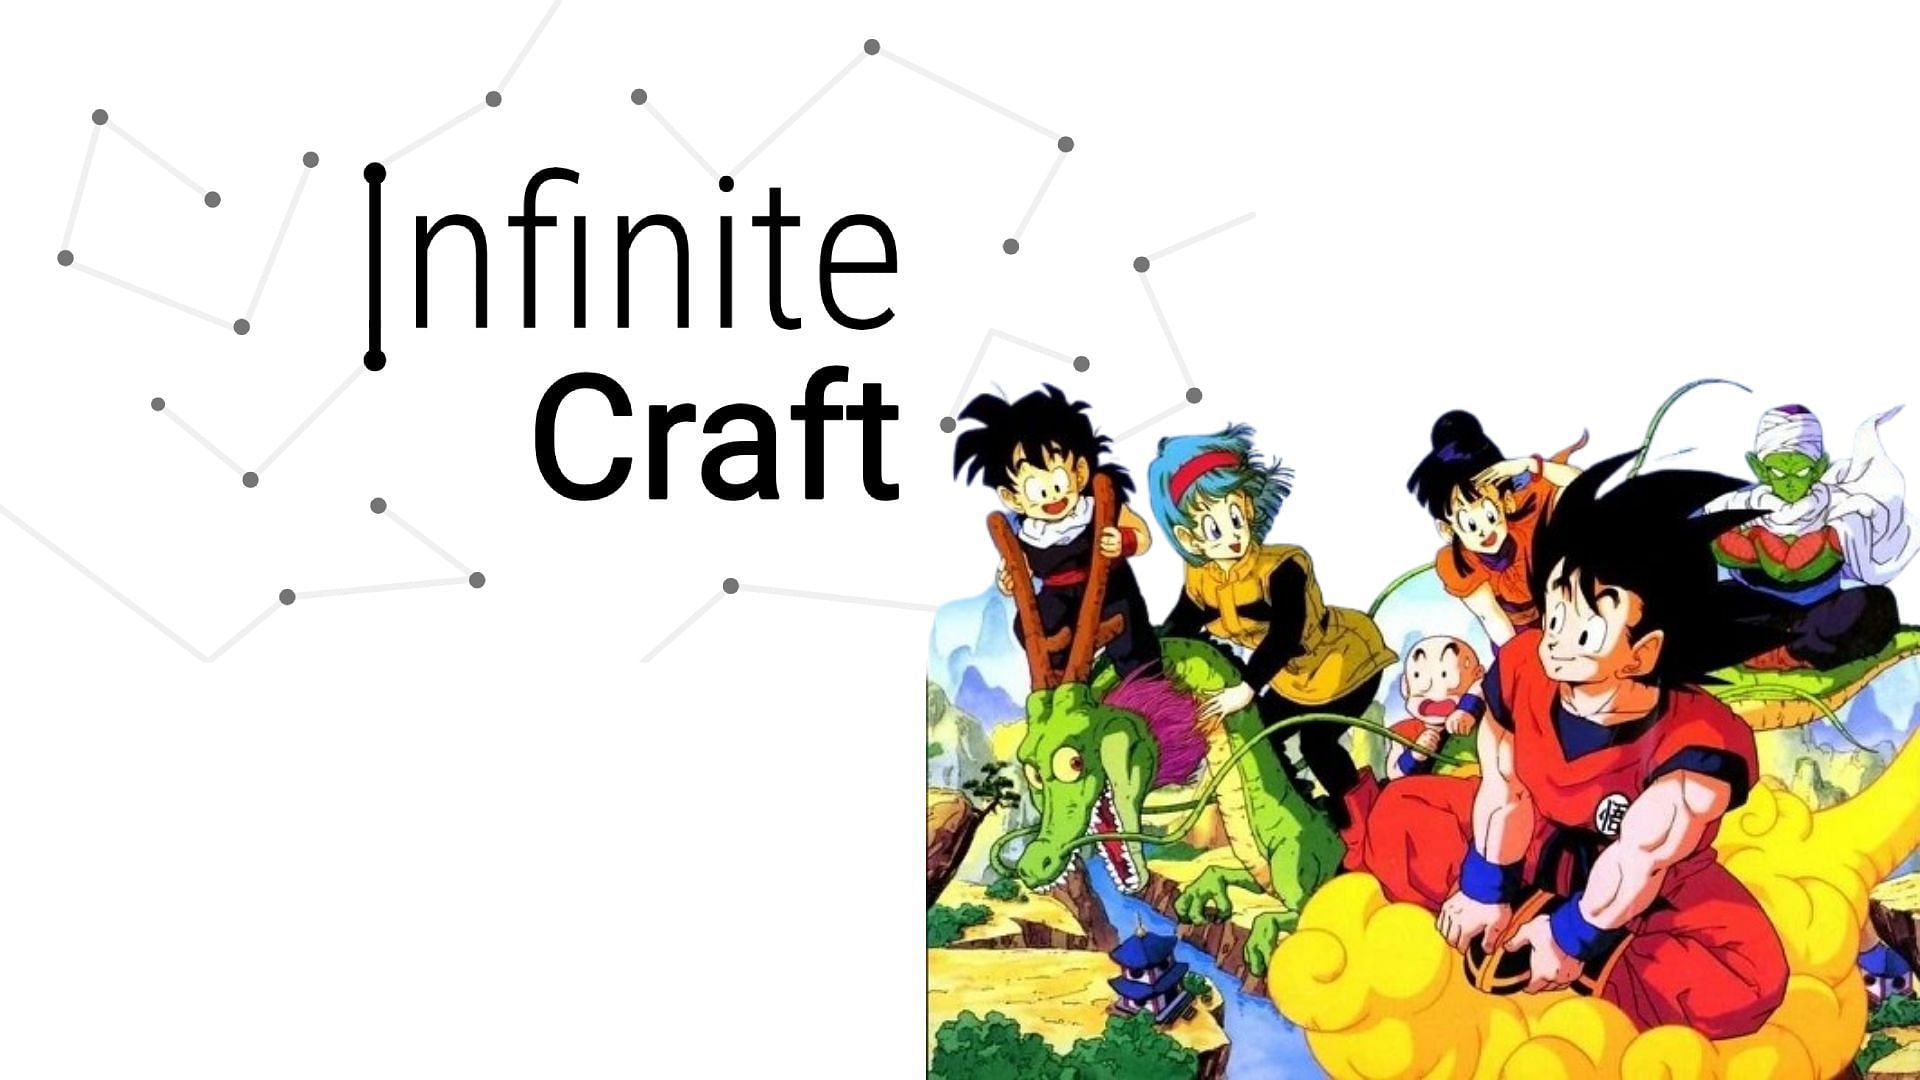 How to make Dragon Ball Z in Infinite Craft (Image via Infinite Craft | Dragon Ball Z)